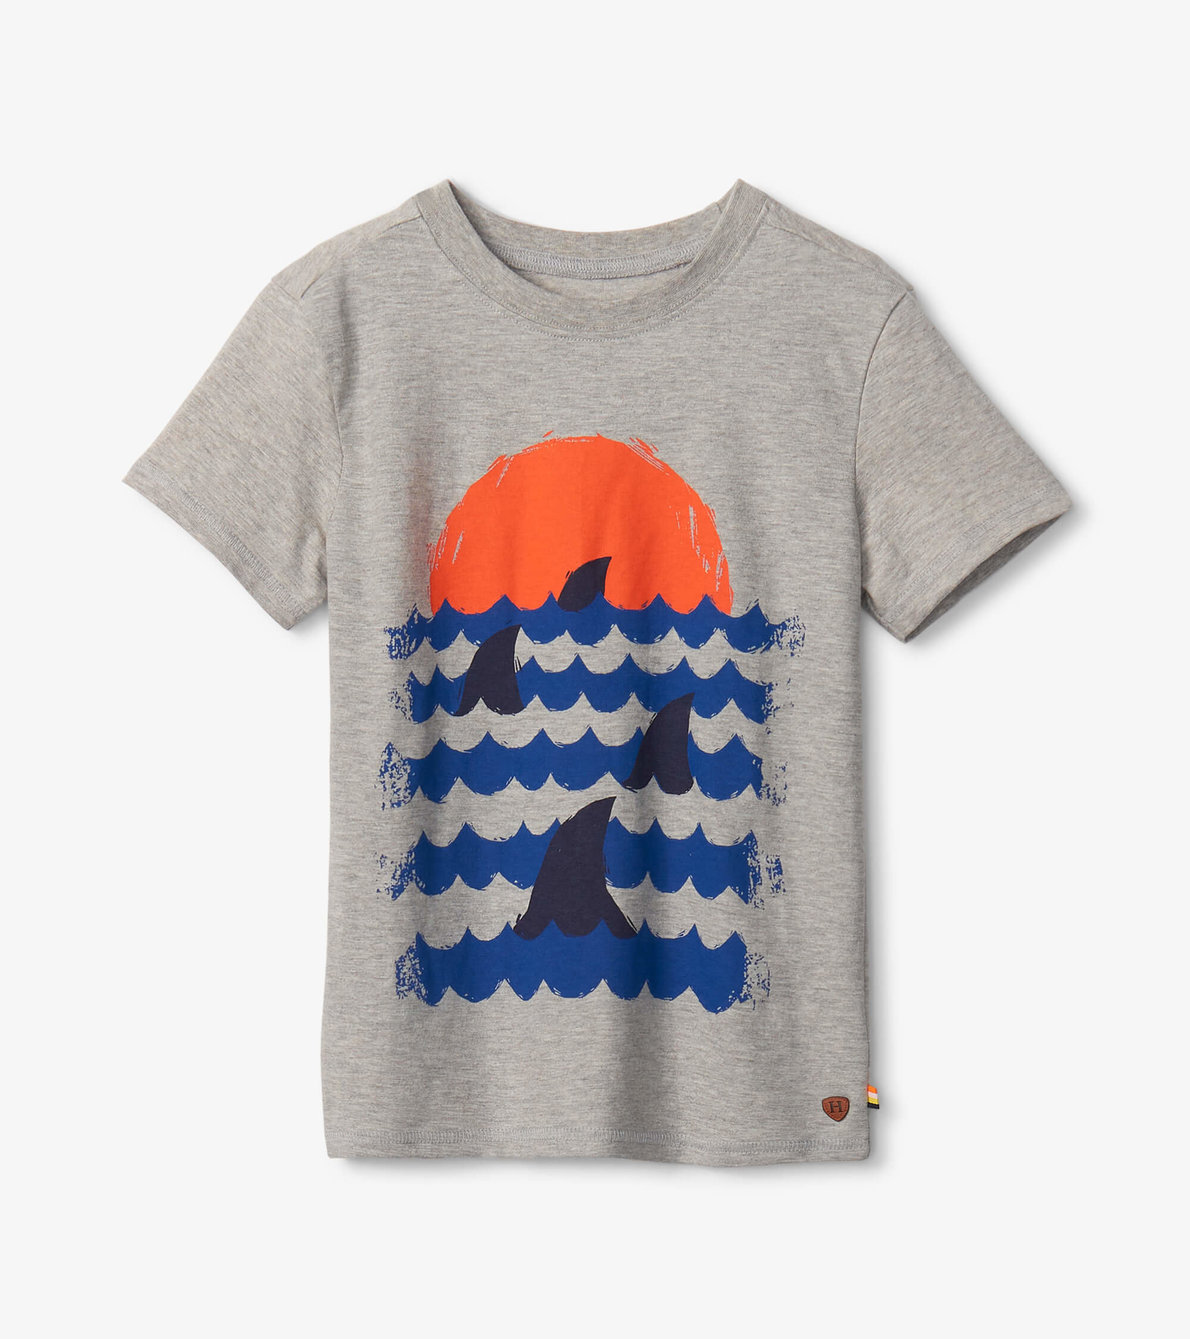 View larger image of Sunset Fins Graphic Tee